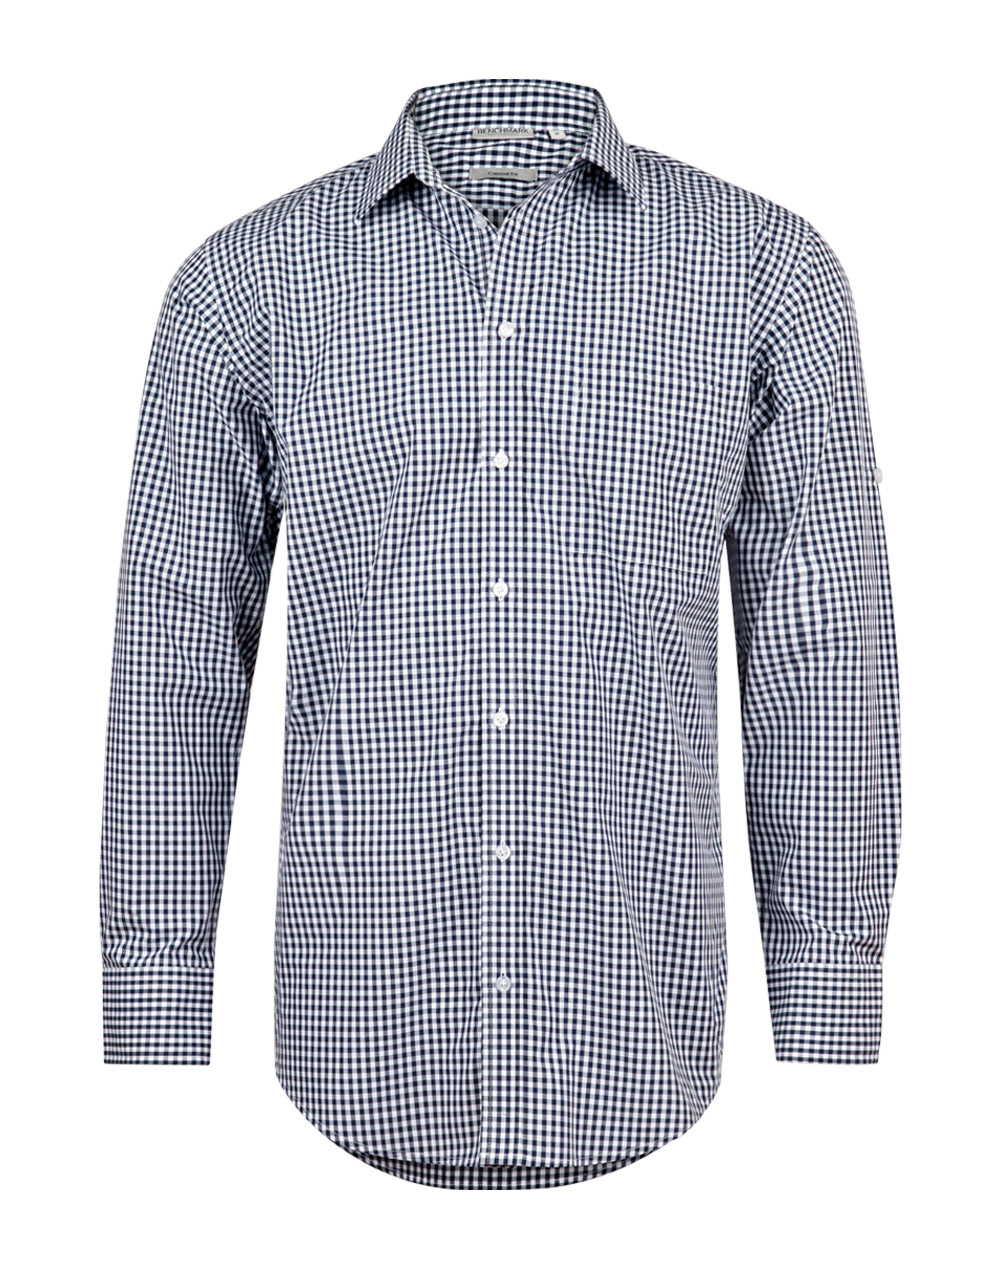 M7300L/M7300S  Men’s Gingham Check Long Sleeve Shirt With Roll-Up Tab Sleeve